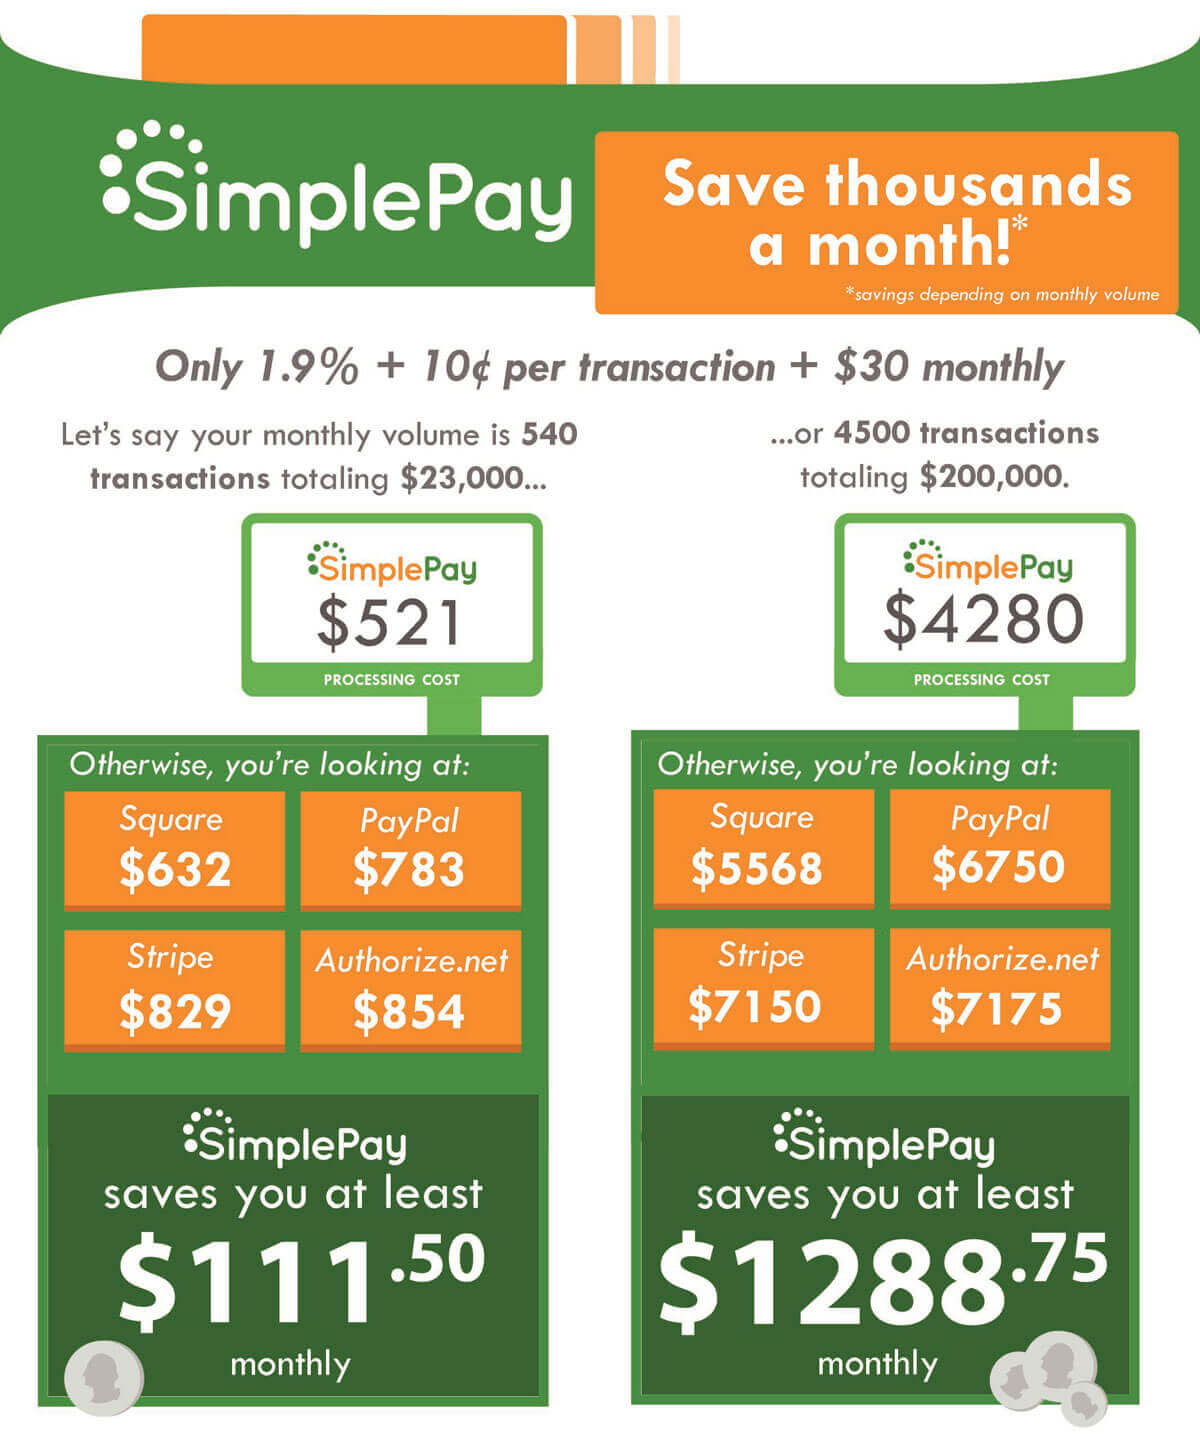 SimplePay infographic about benefits from using SimplePay